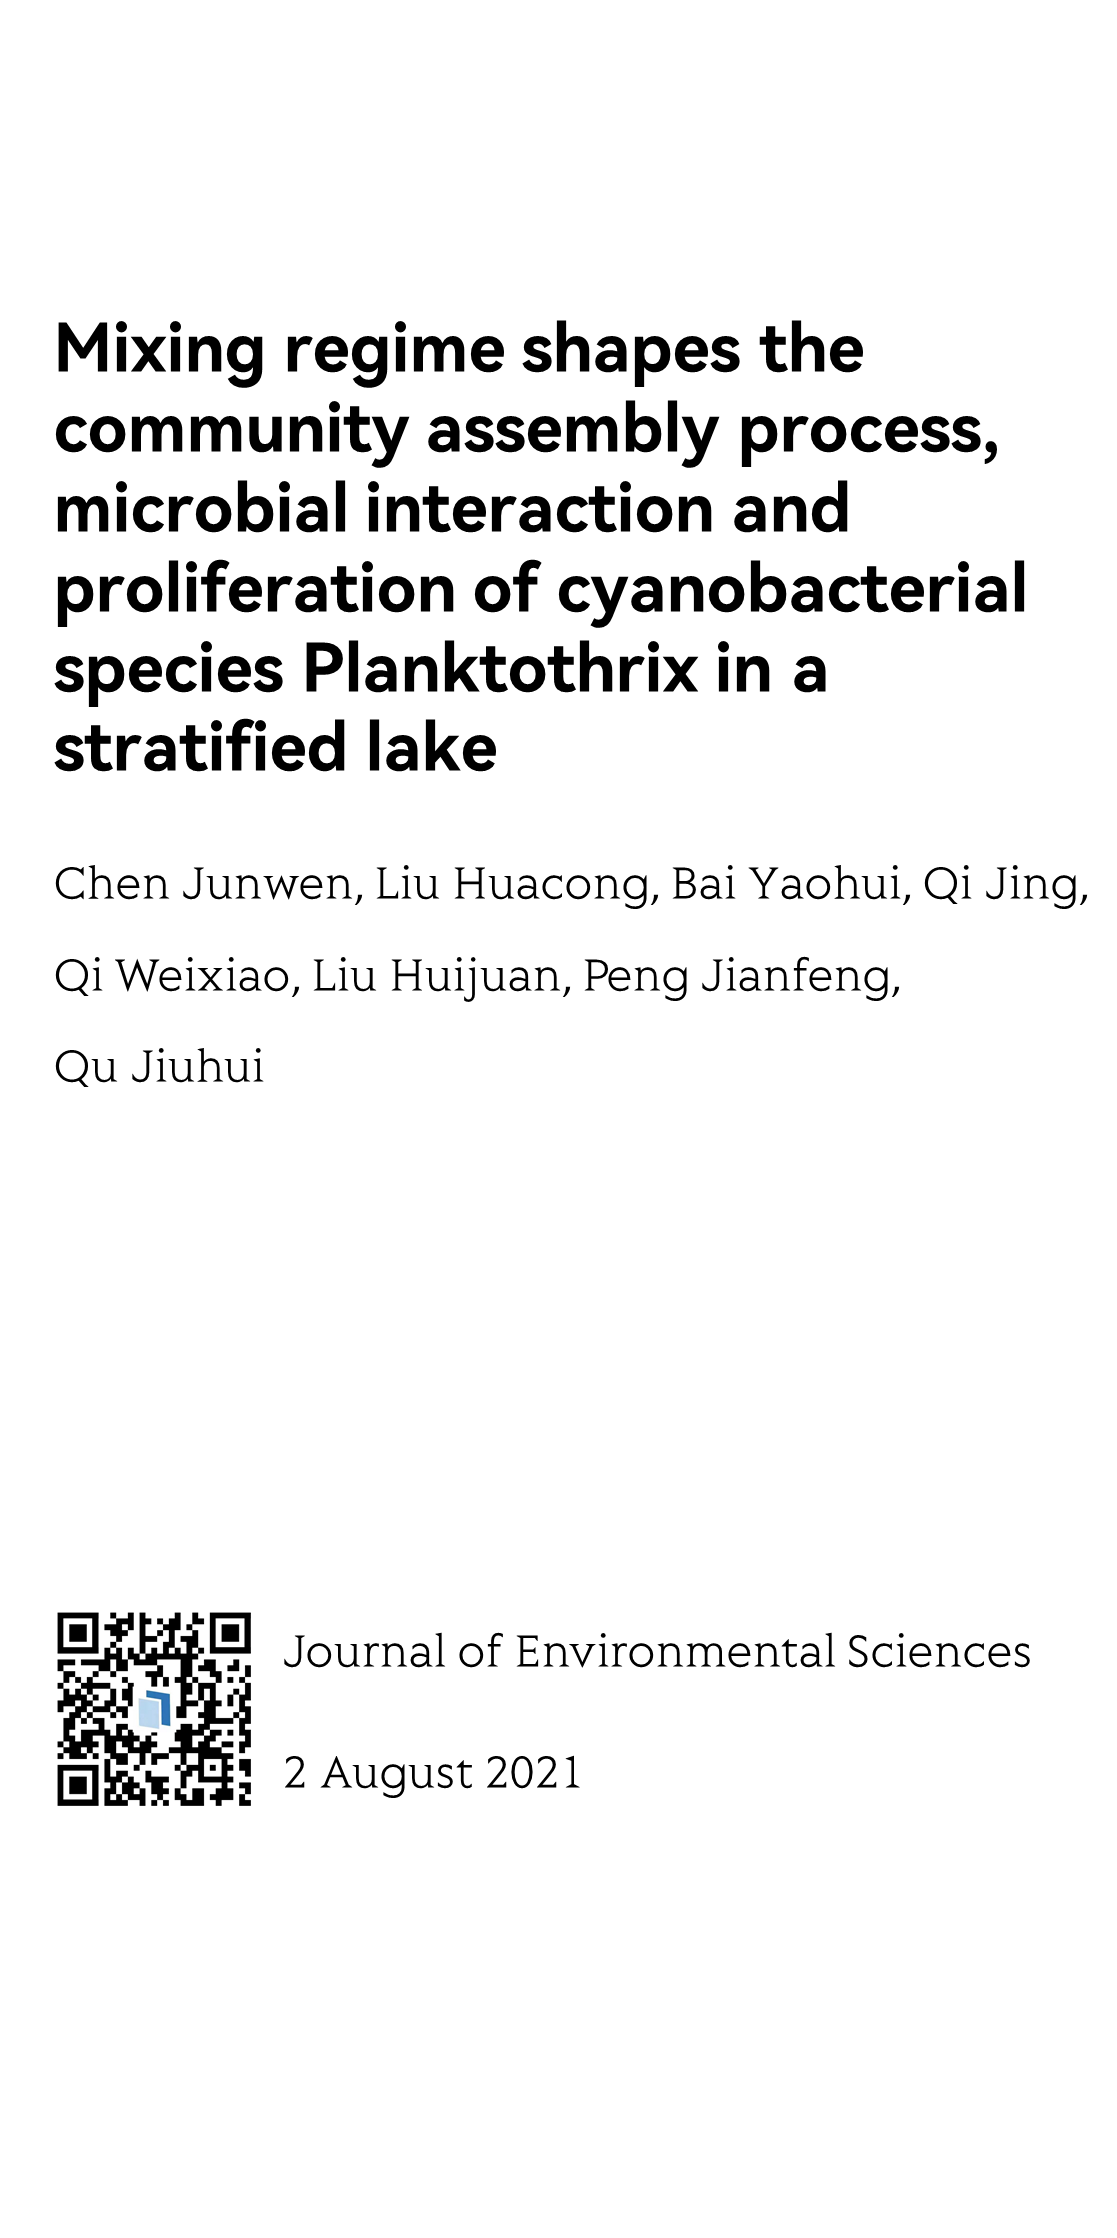 Mixing regime shapes the community assembly process, microbial interaction and proliferation of cyanobacterial species Planktothrix in a stratified lake_1